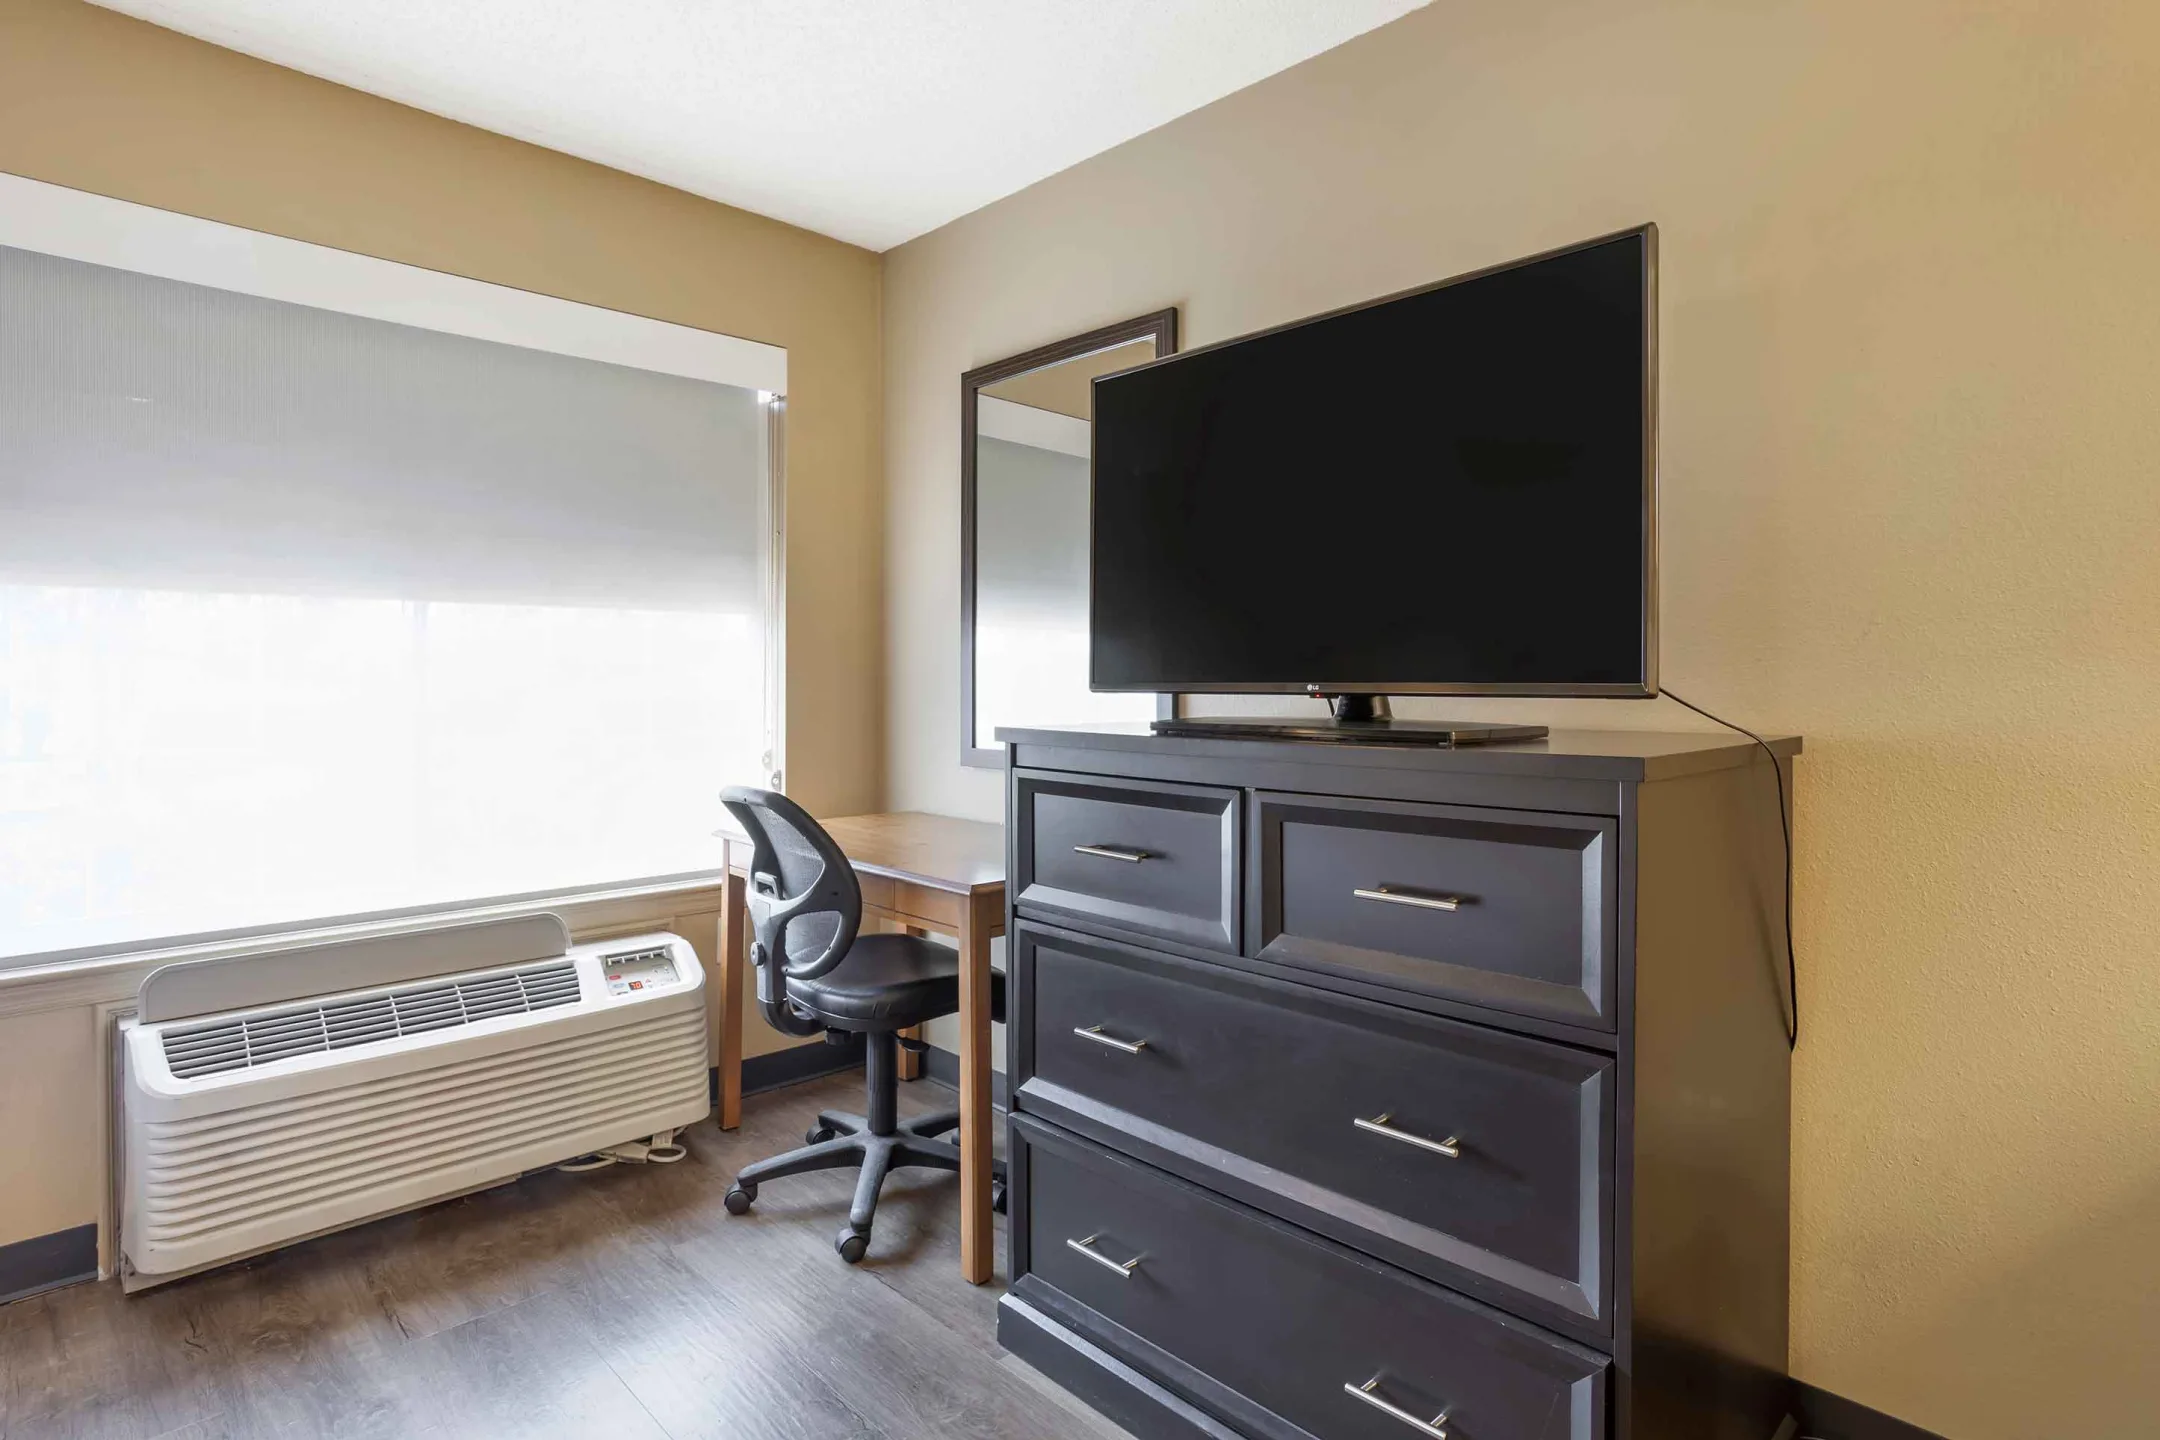 Bedroom - Furnished Studio - Meadowlands - East Rutherford - East Rutherford, NJ